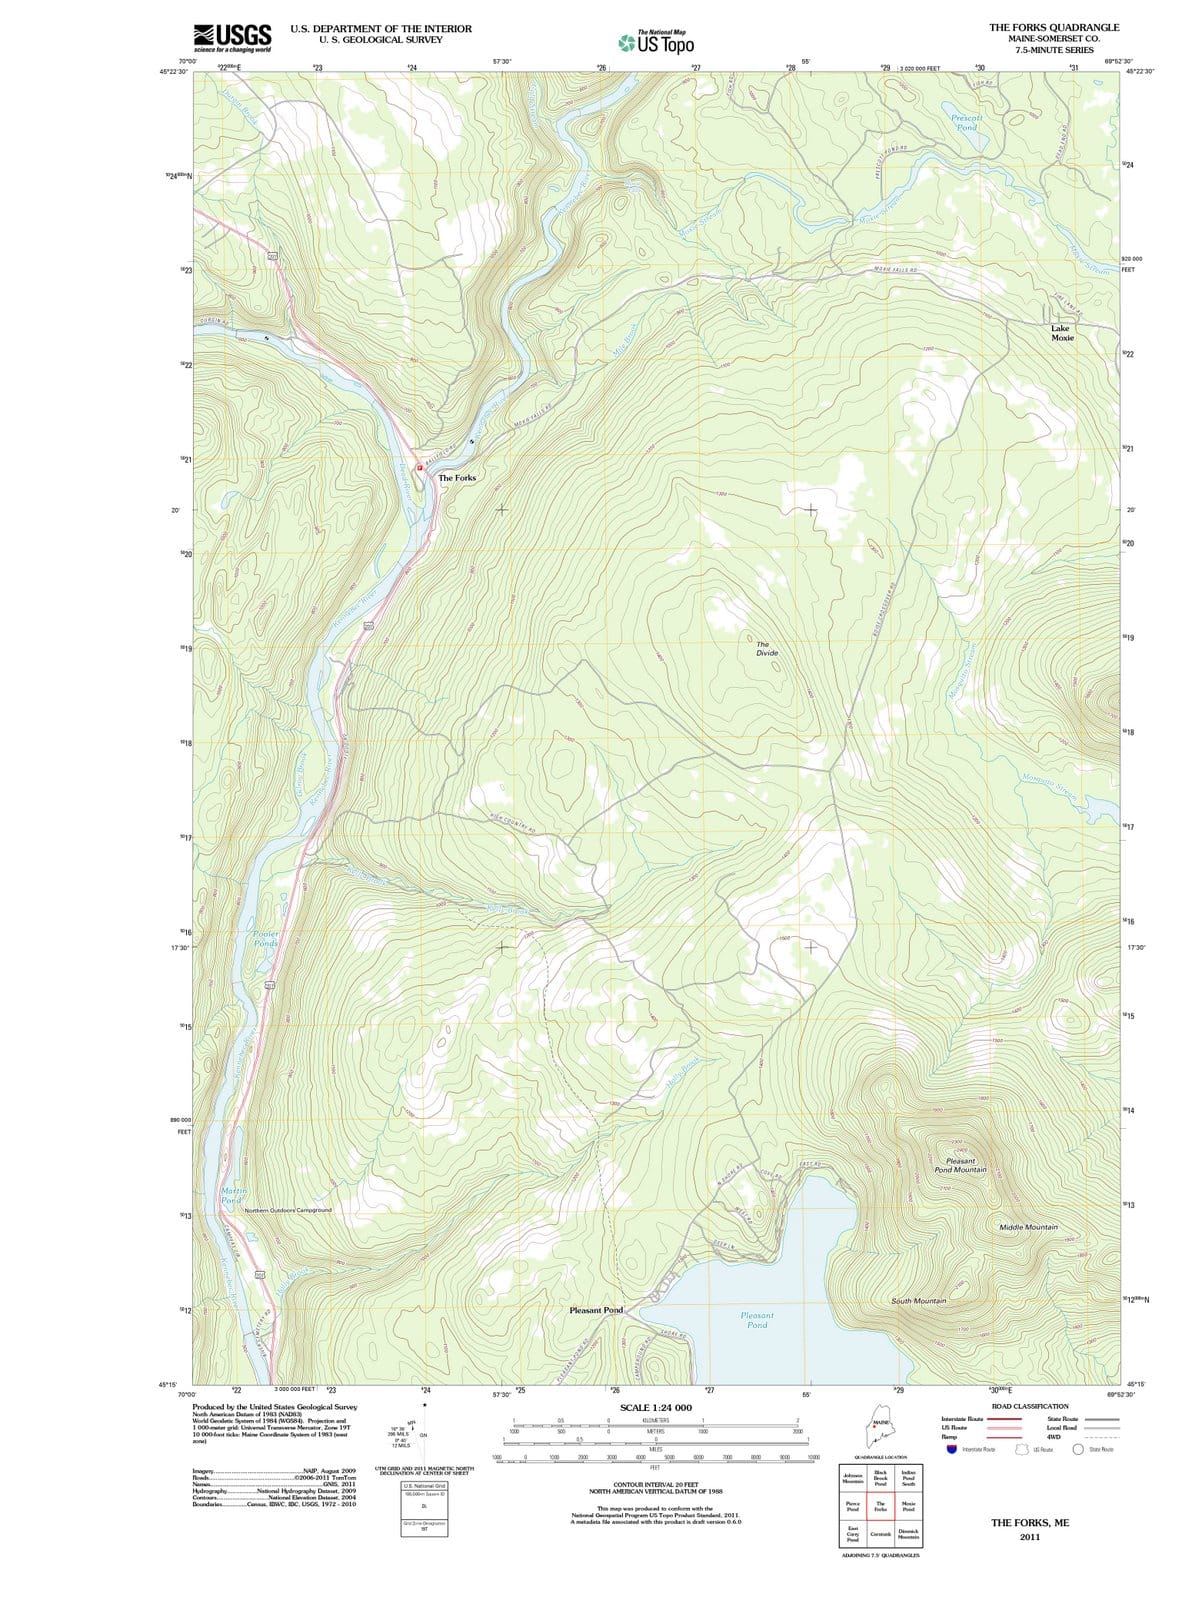 2011 The Forks, ME - Maine - USGS Topographic Map